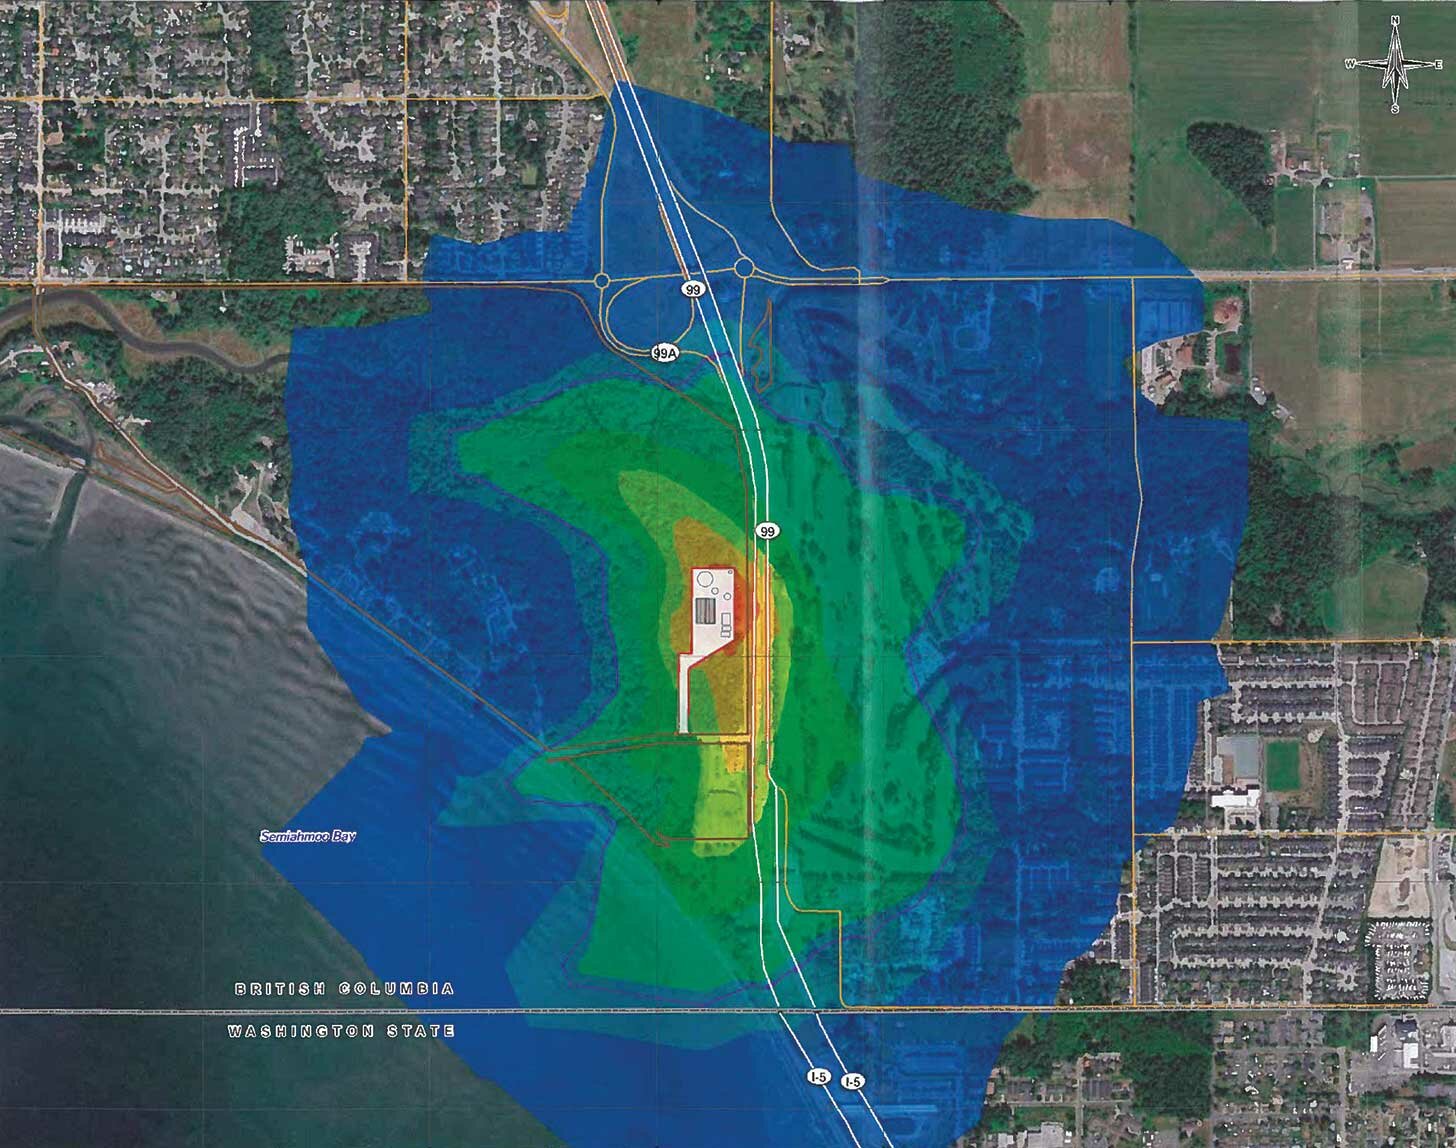 According to modeling created by Tetra Tech, an environmental engineering firm hired by Andion Global, residents of northwest Blaine could expect annually up to 24 odor events lasting 10 minutes.